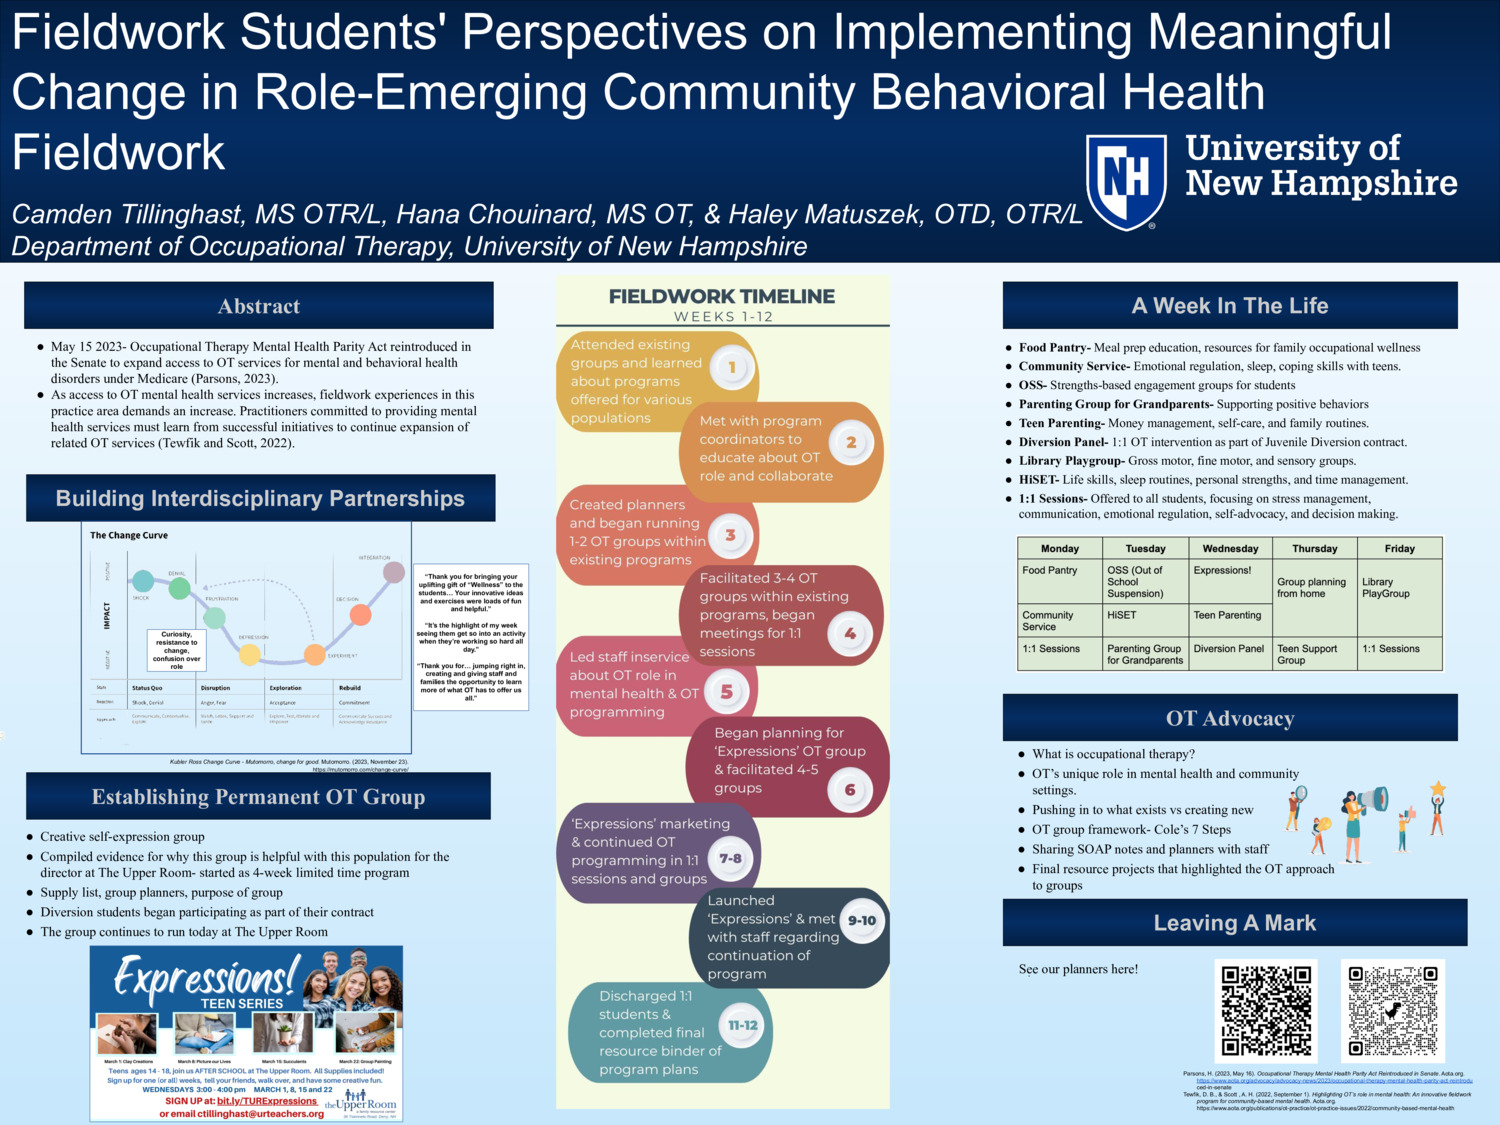 Fieldwork Students' Perspectives On Implementing Meaningful Change In Role-Emerging Community Behavioral Health Fieldwork by hmh45